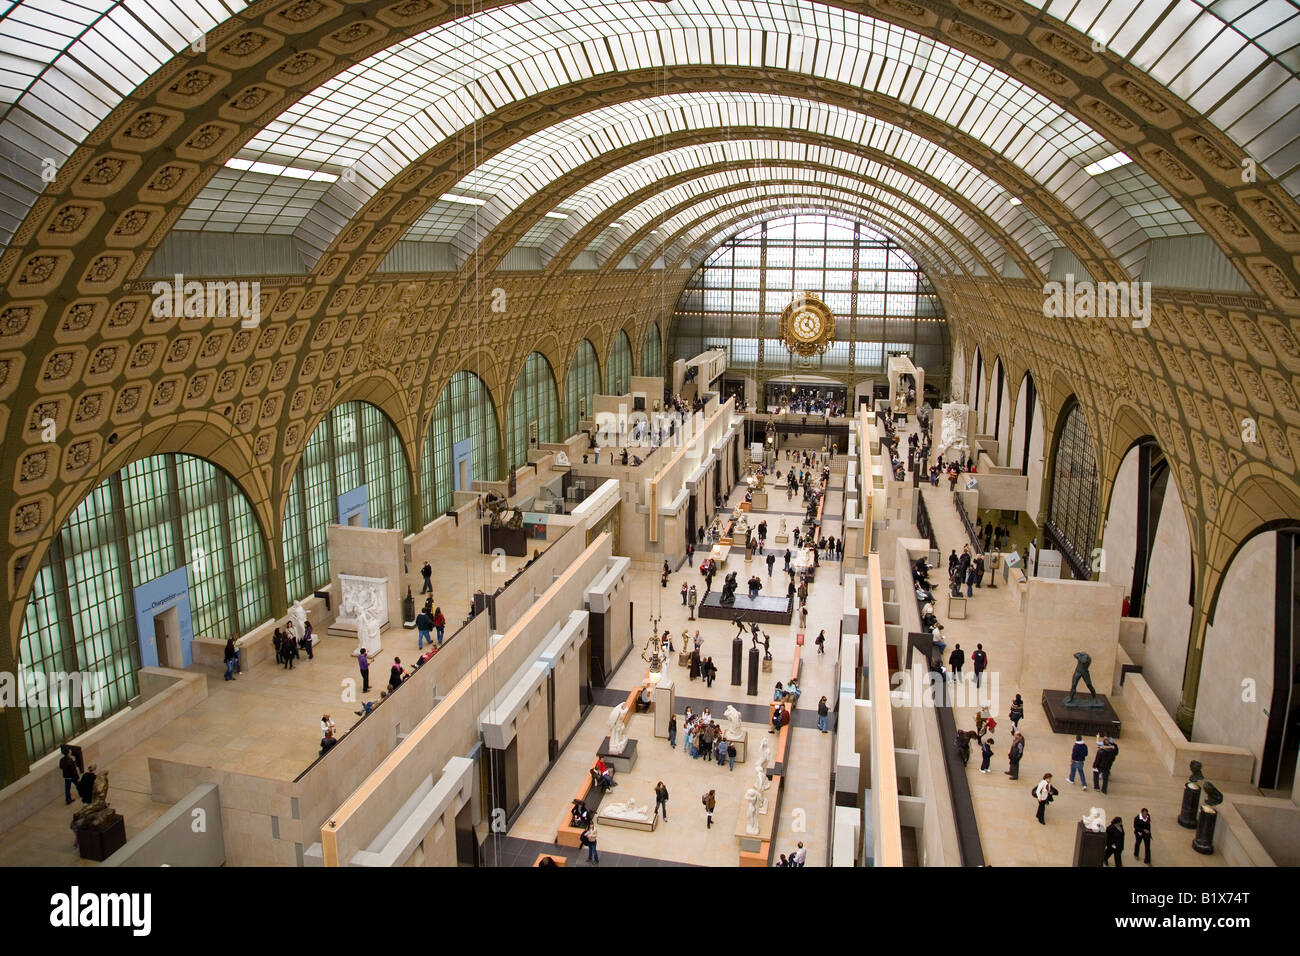 Musee D'Orsay D Orsay Art Gallery and Museum interior Paris France Europe EU Stock Photo